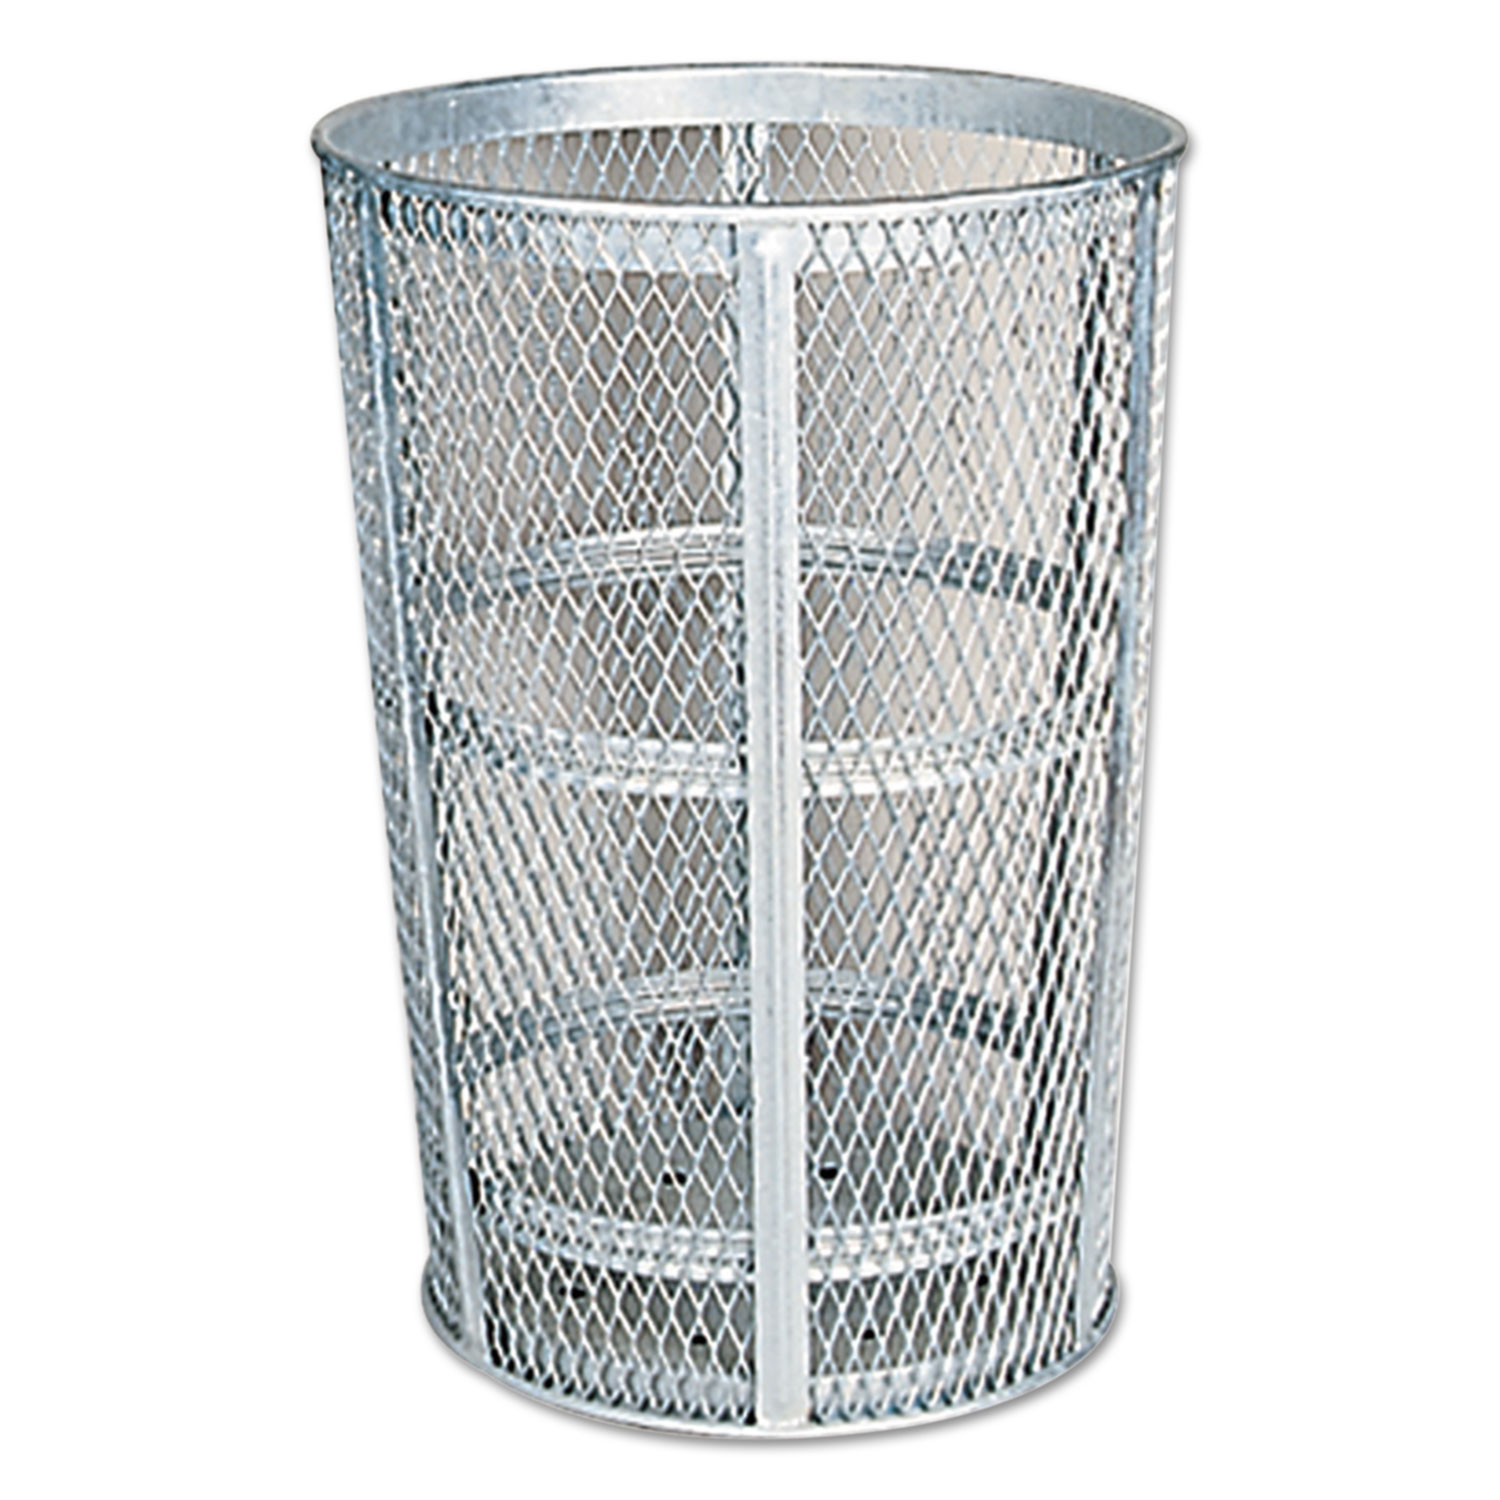  Rubbermaid Commercial FGSBR52 Street Basket Waste Receptacle, 23 Diameter, 45 gal, Silver (RCPSBR52) 